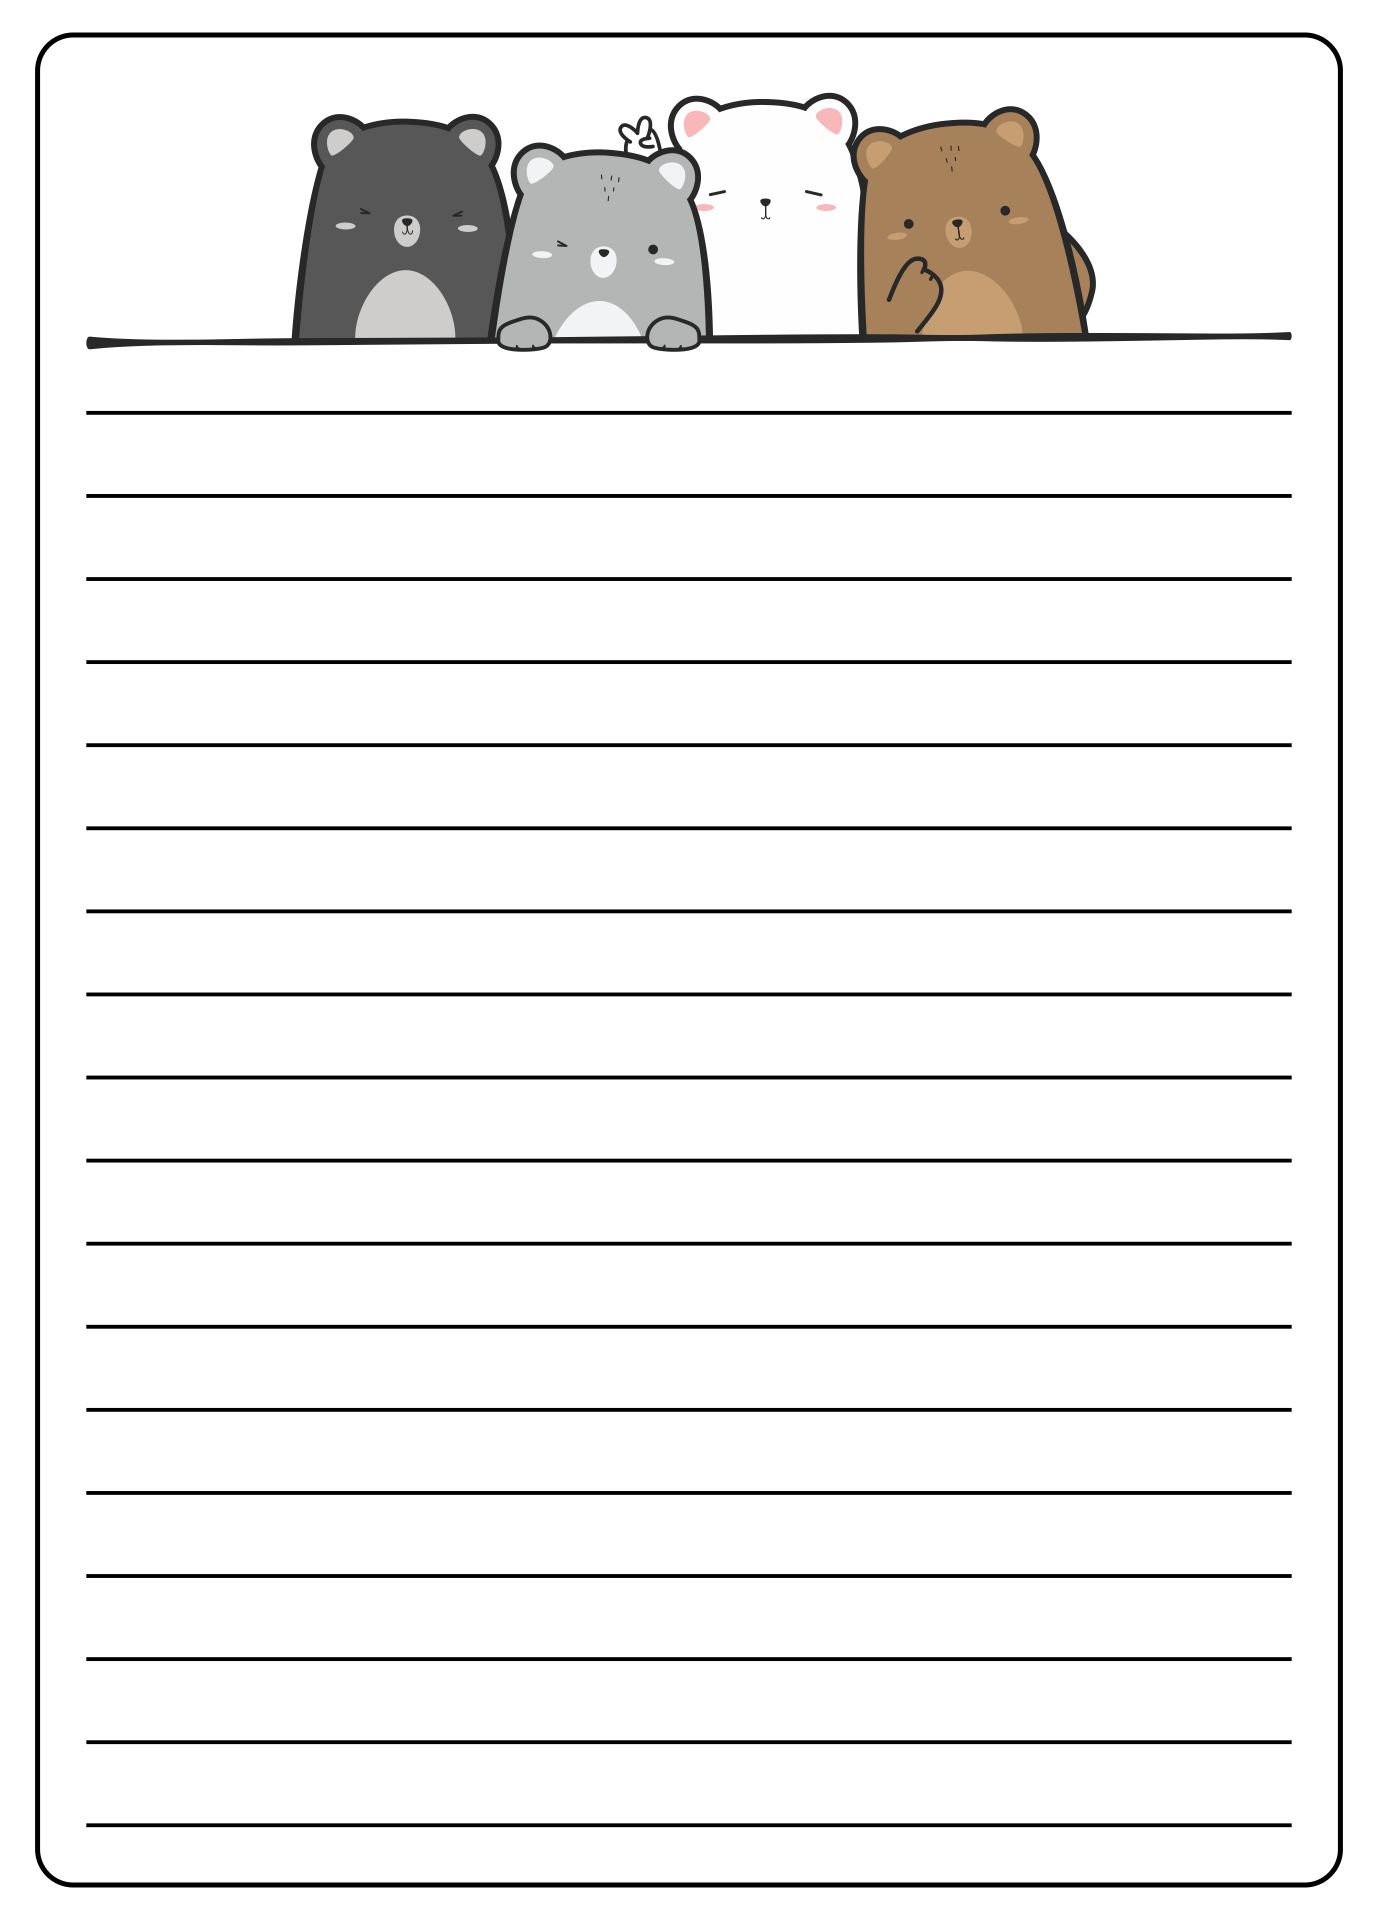 Lined Stationery Paper Printable 7861